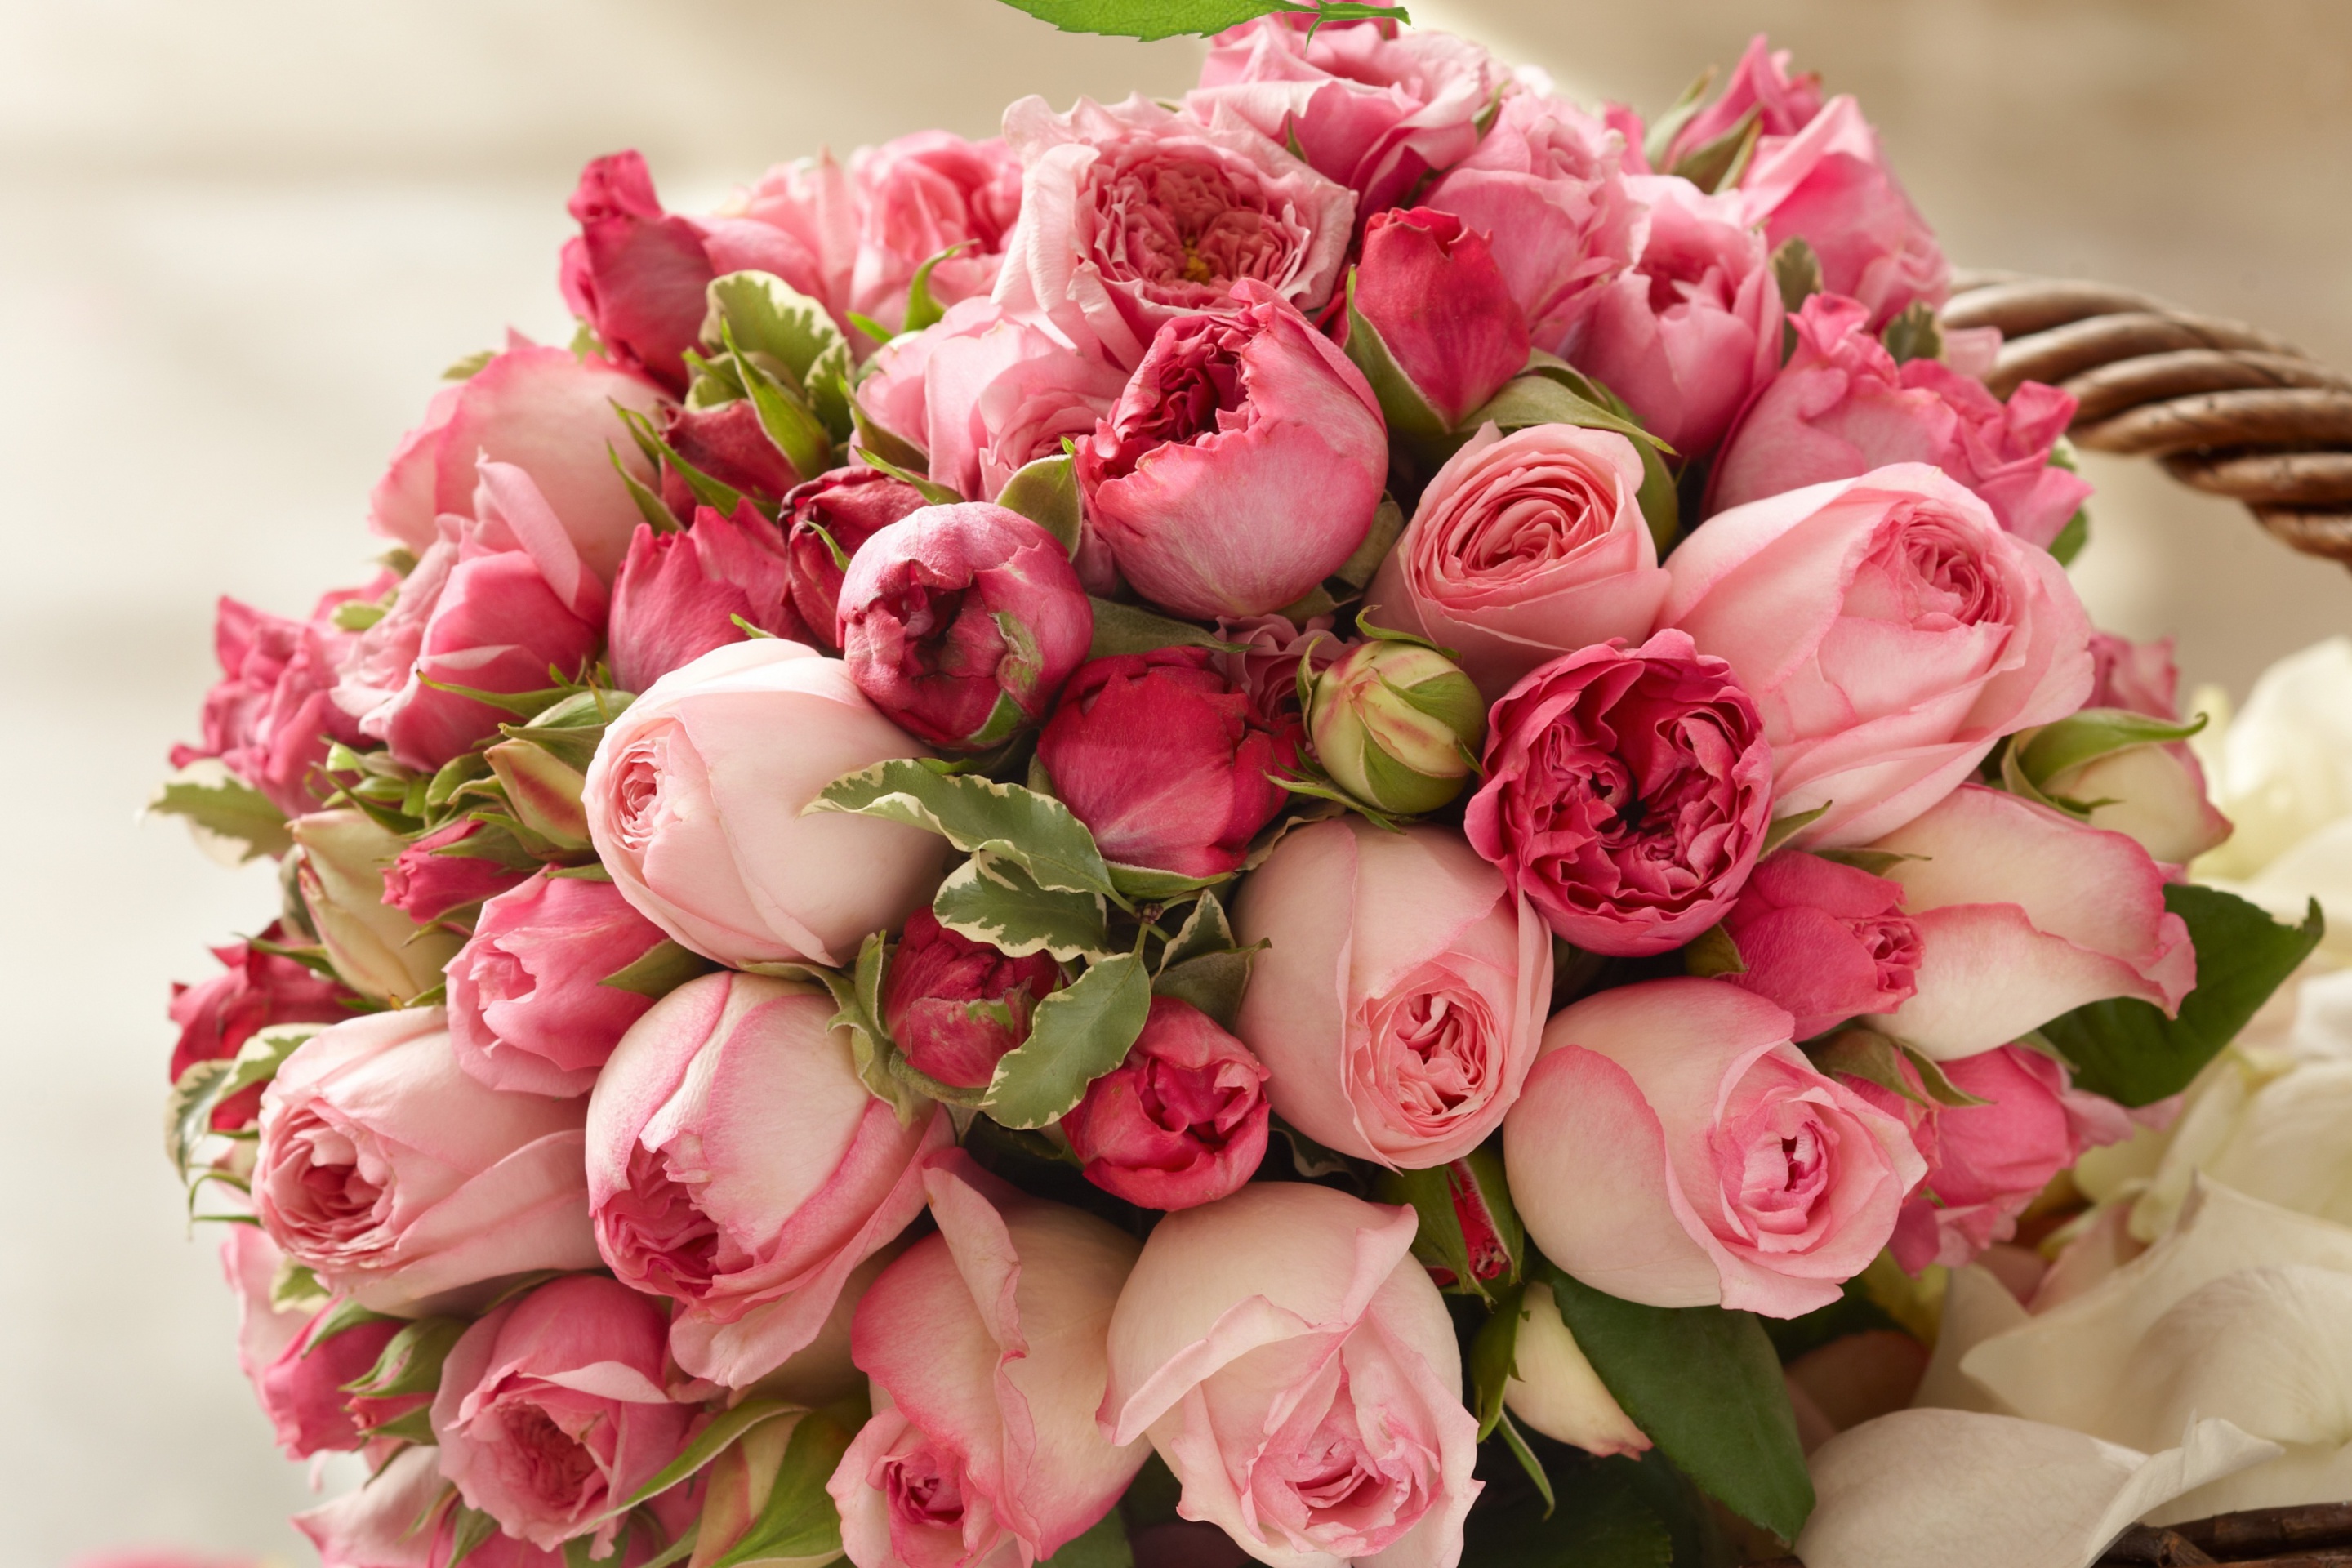 Bouquet of pink roses wallpaper 2880x1920